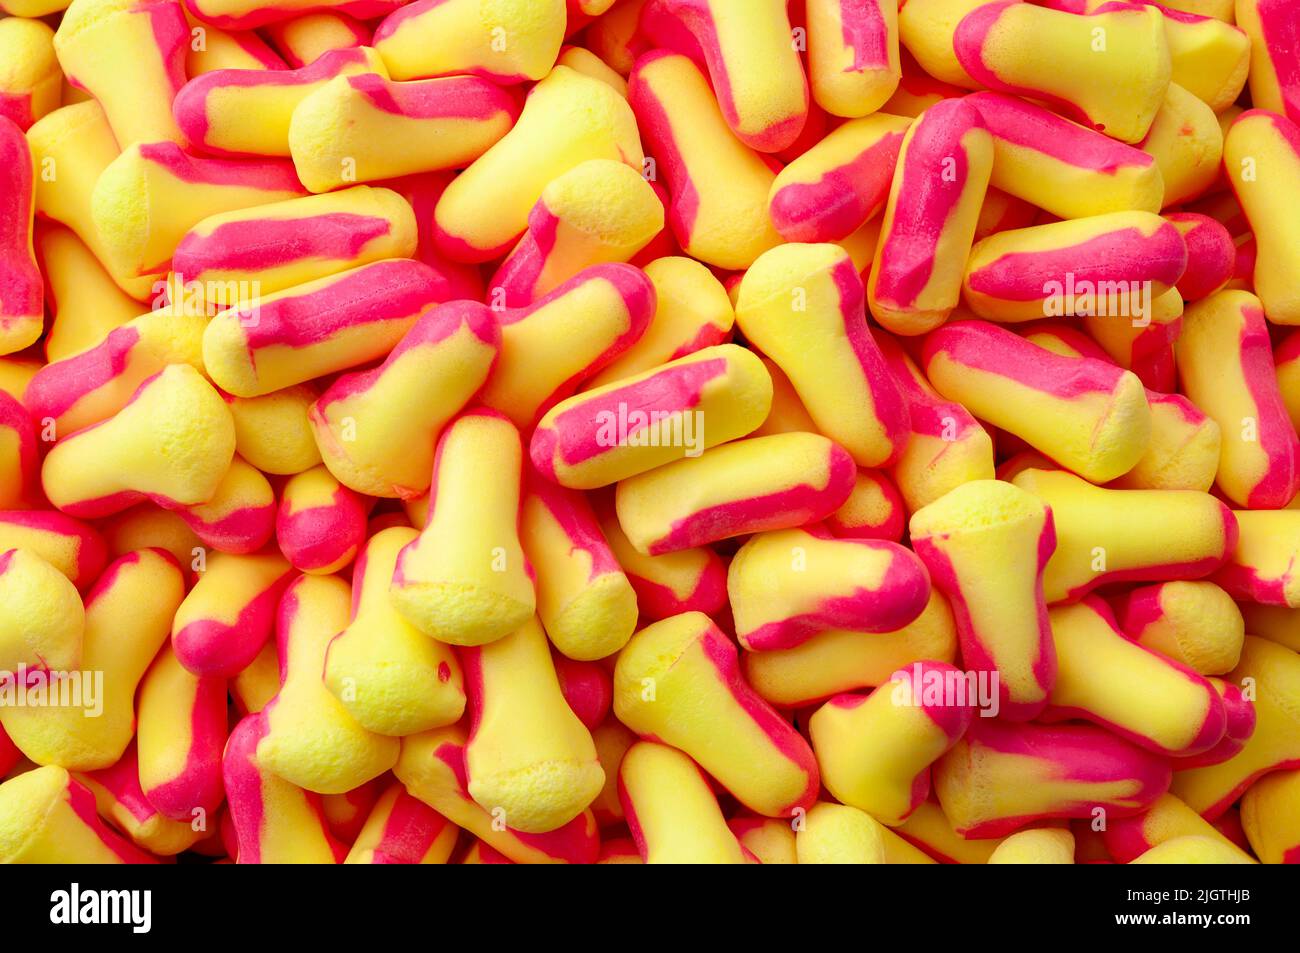 Full frame background image of multiple soft foam earplugs scattered concept for Hearing protection equipment, industrial PPE backgrounds and noise re Stock Photo